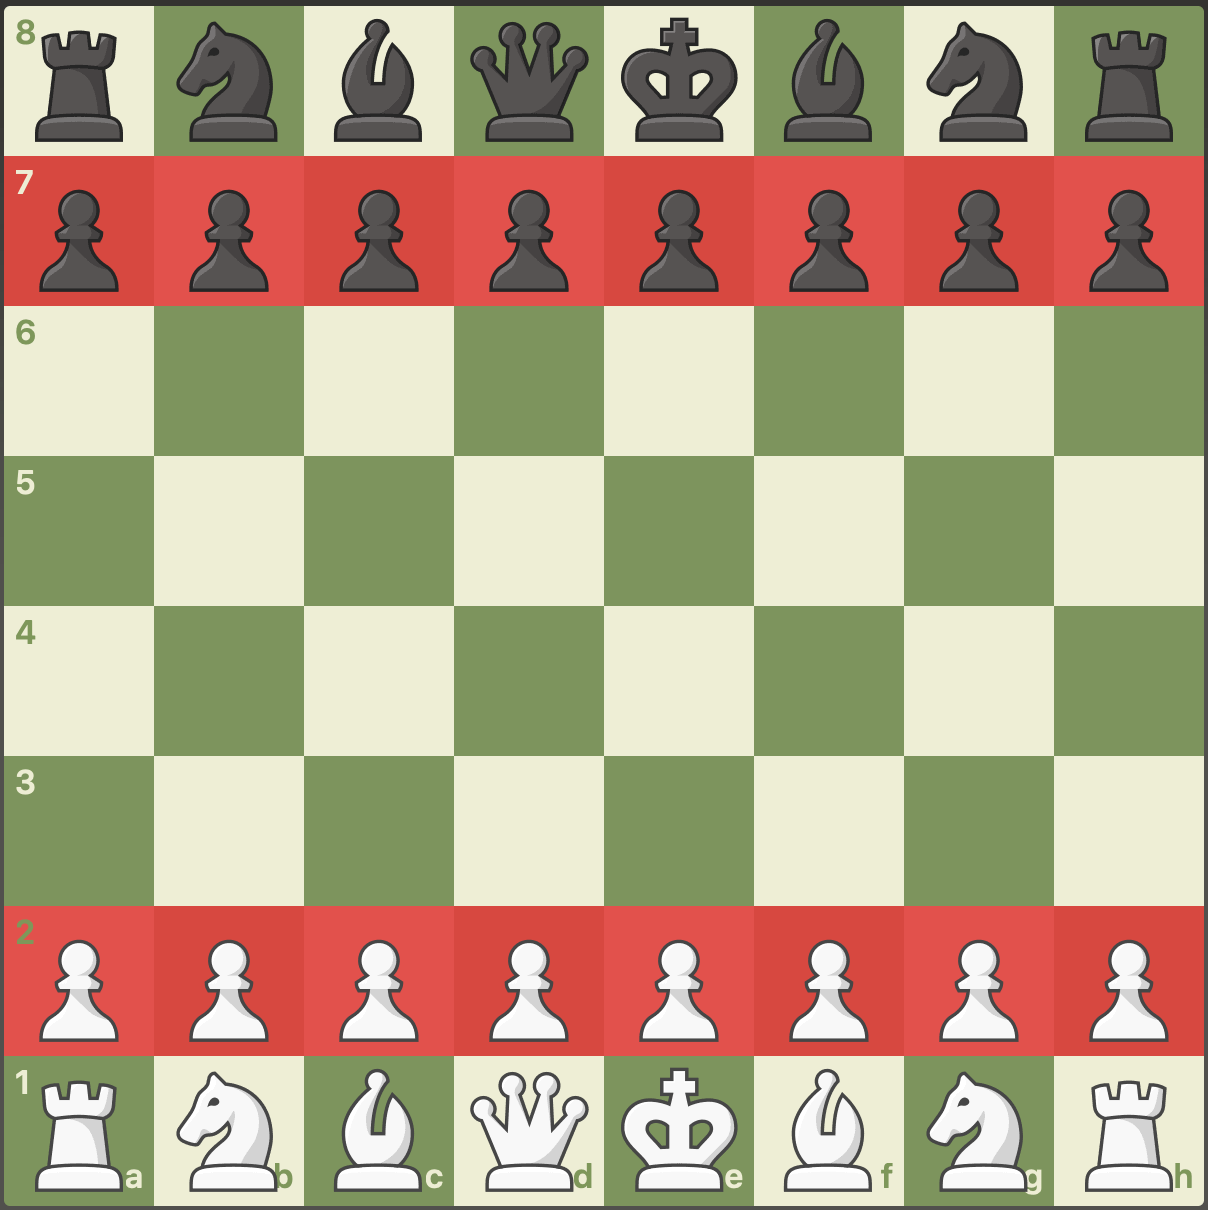 Chess2Play (@chess2play) • Instagram photos and videos